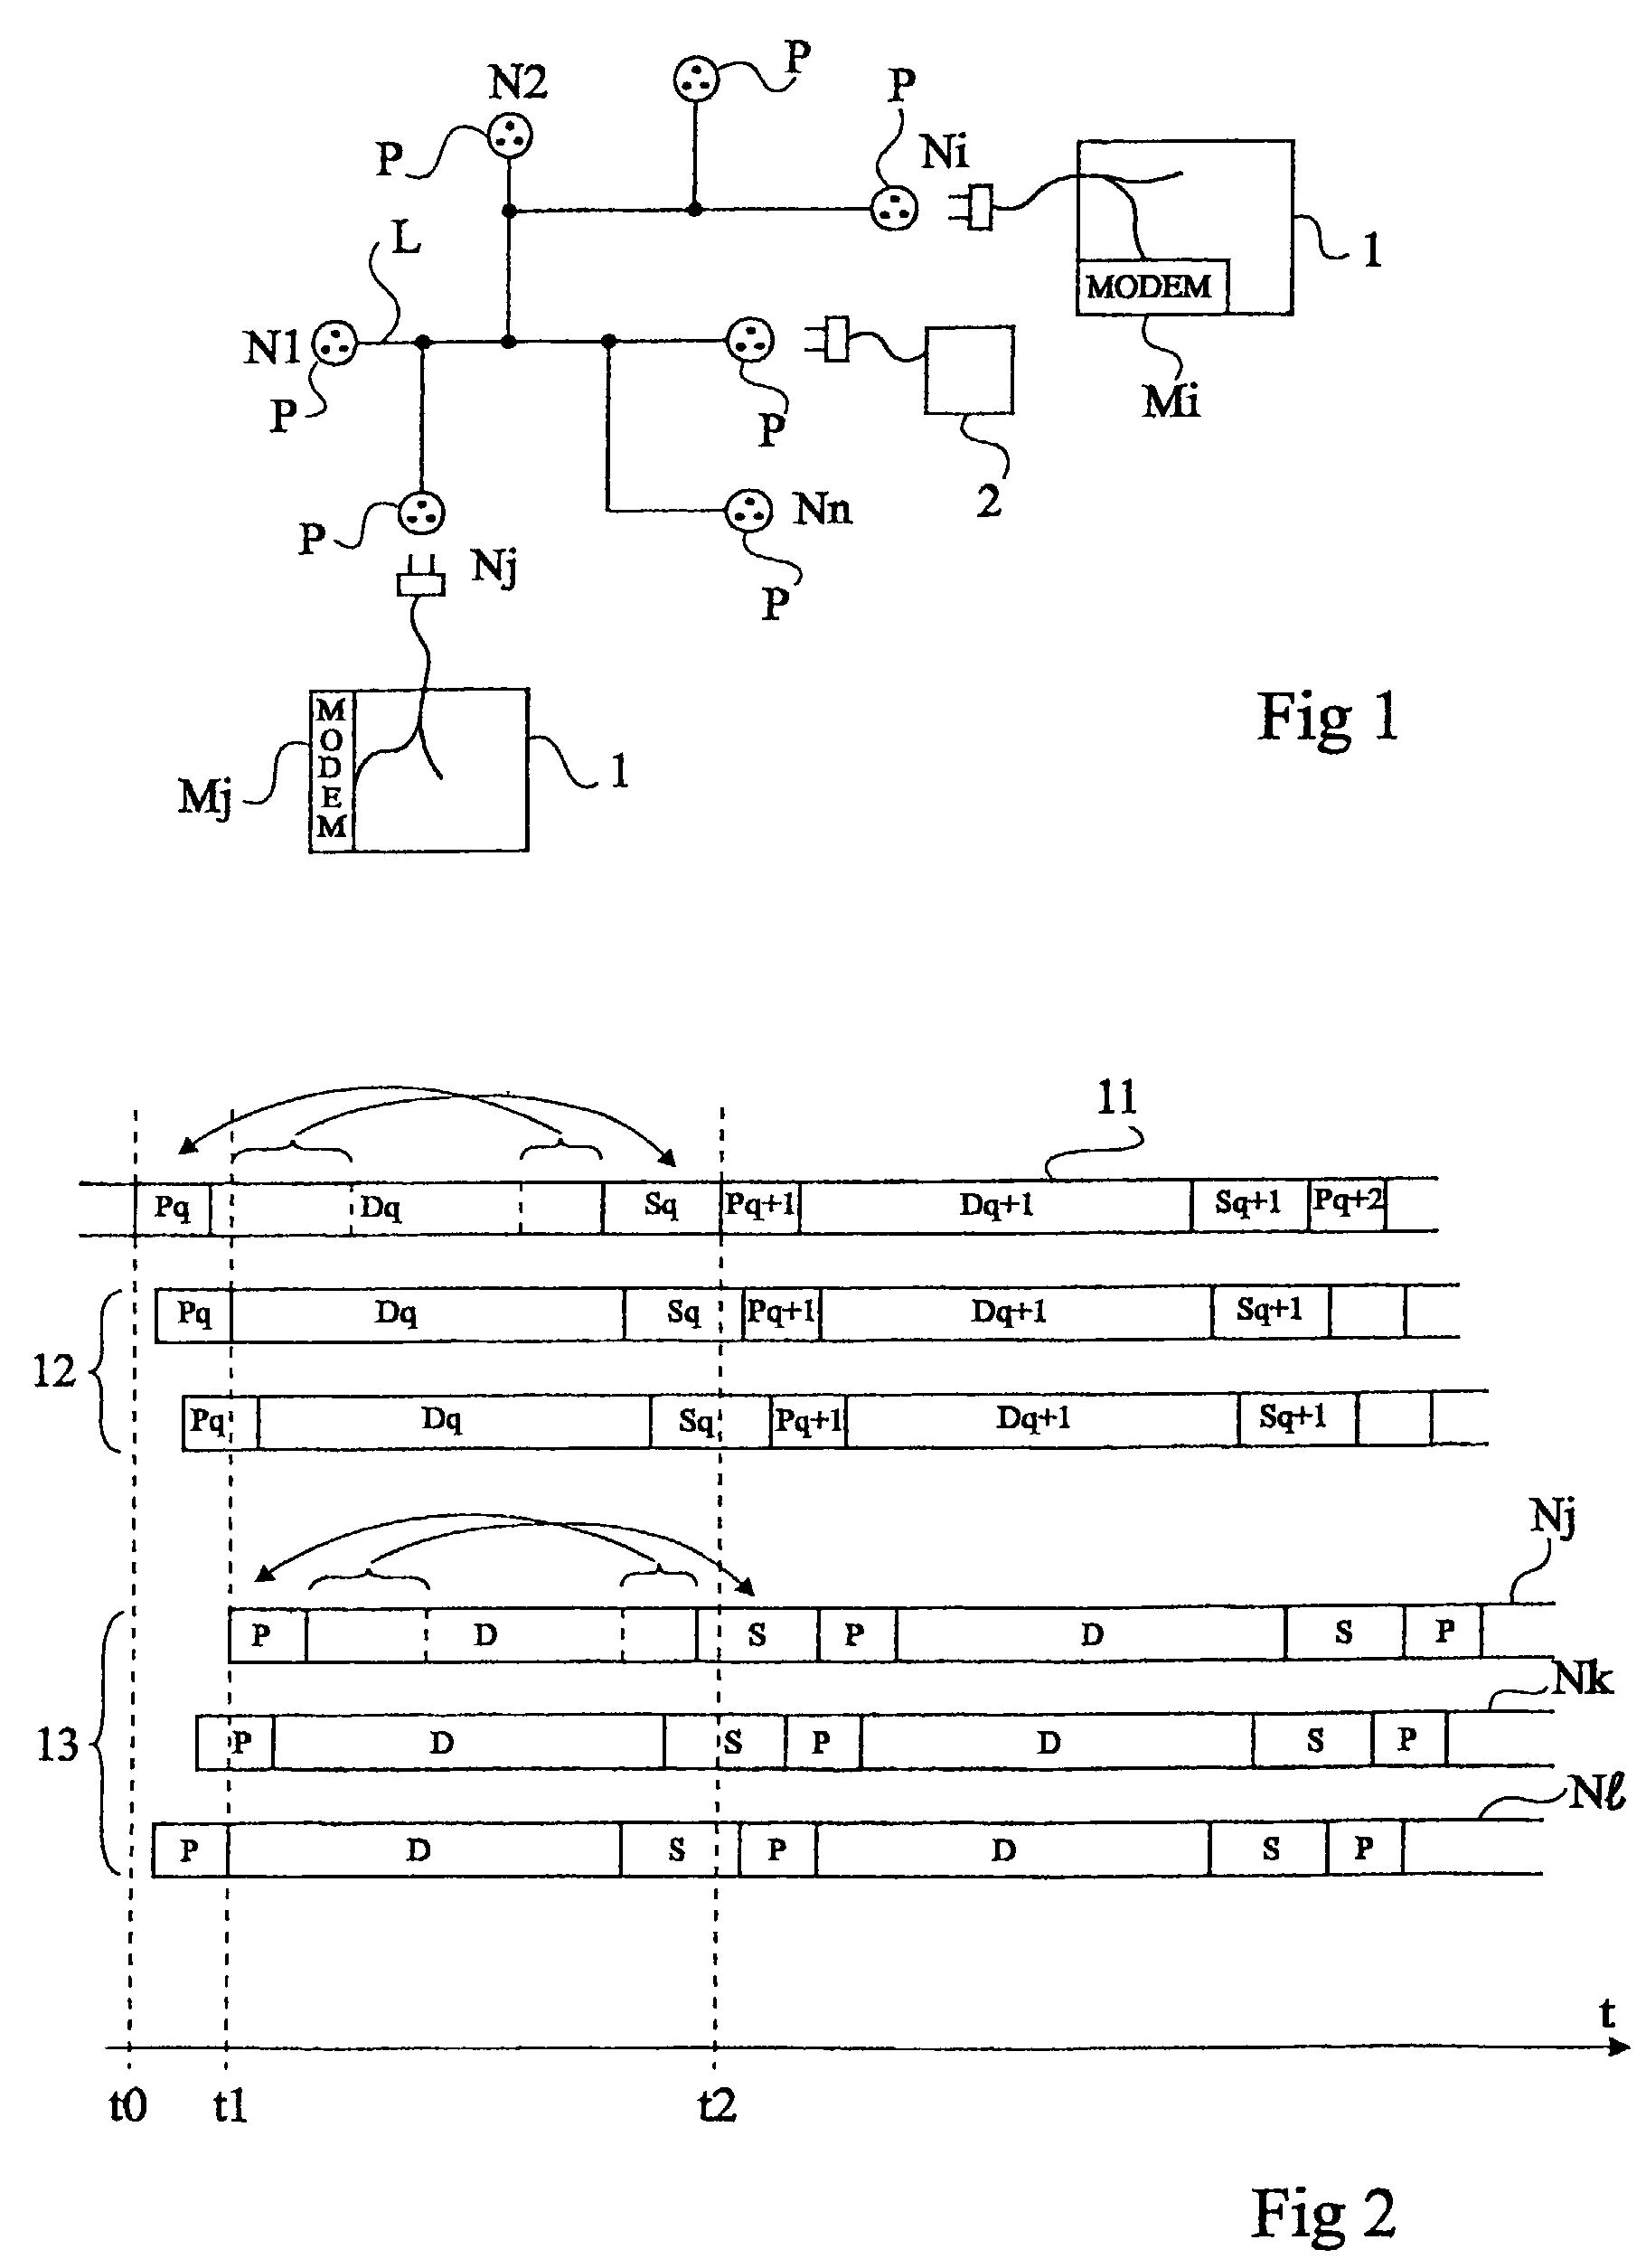 Method of data transmission by orthogonal frequency-division multiplexing